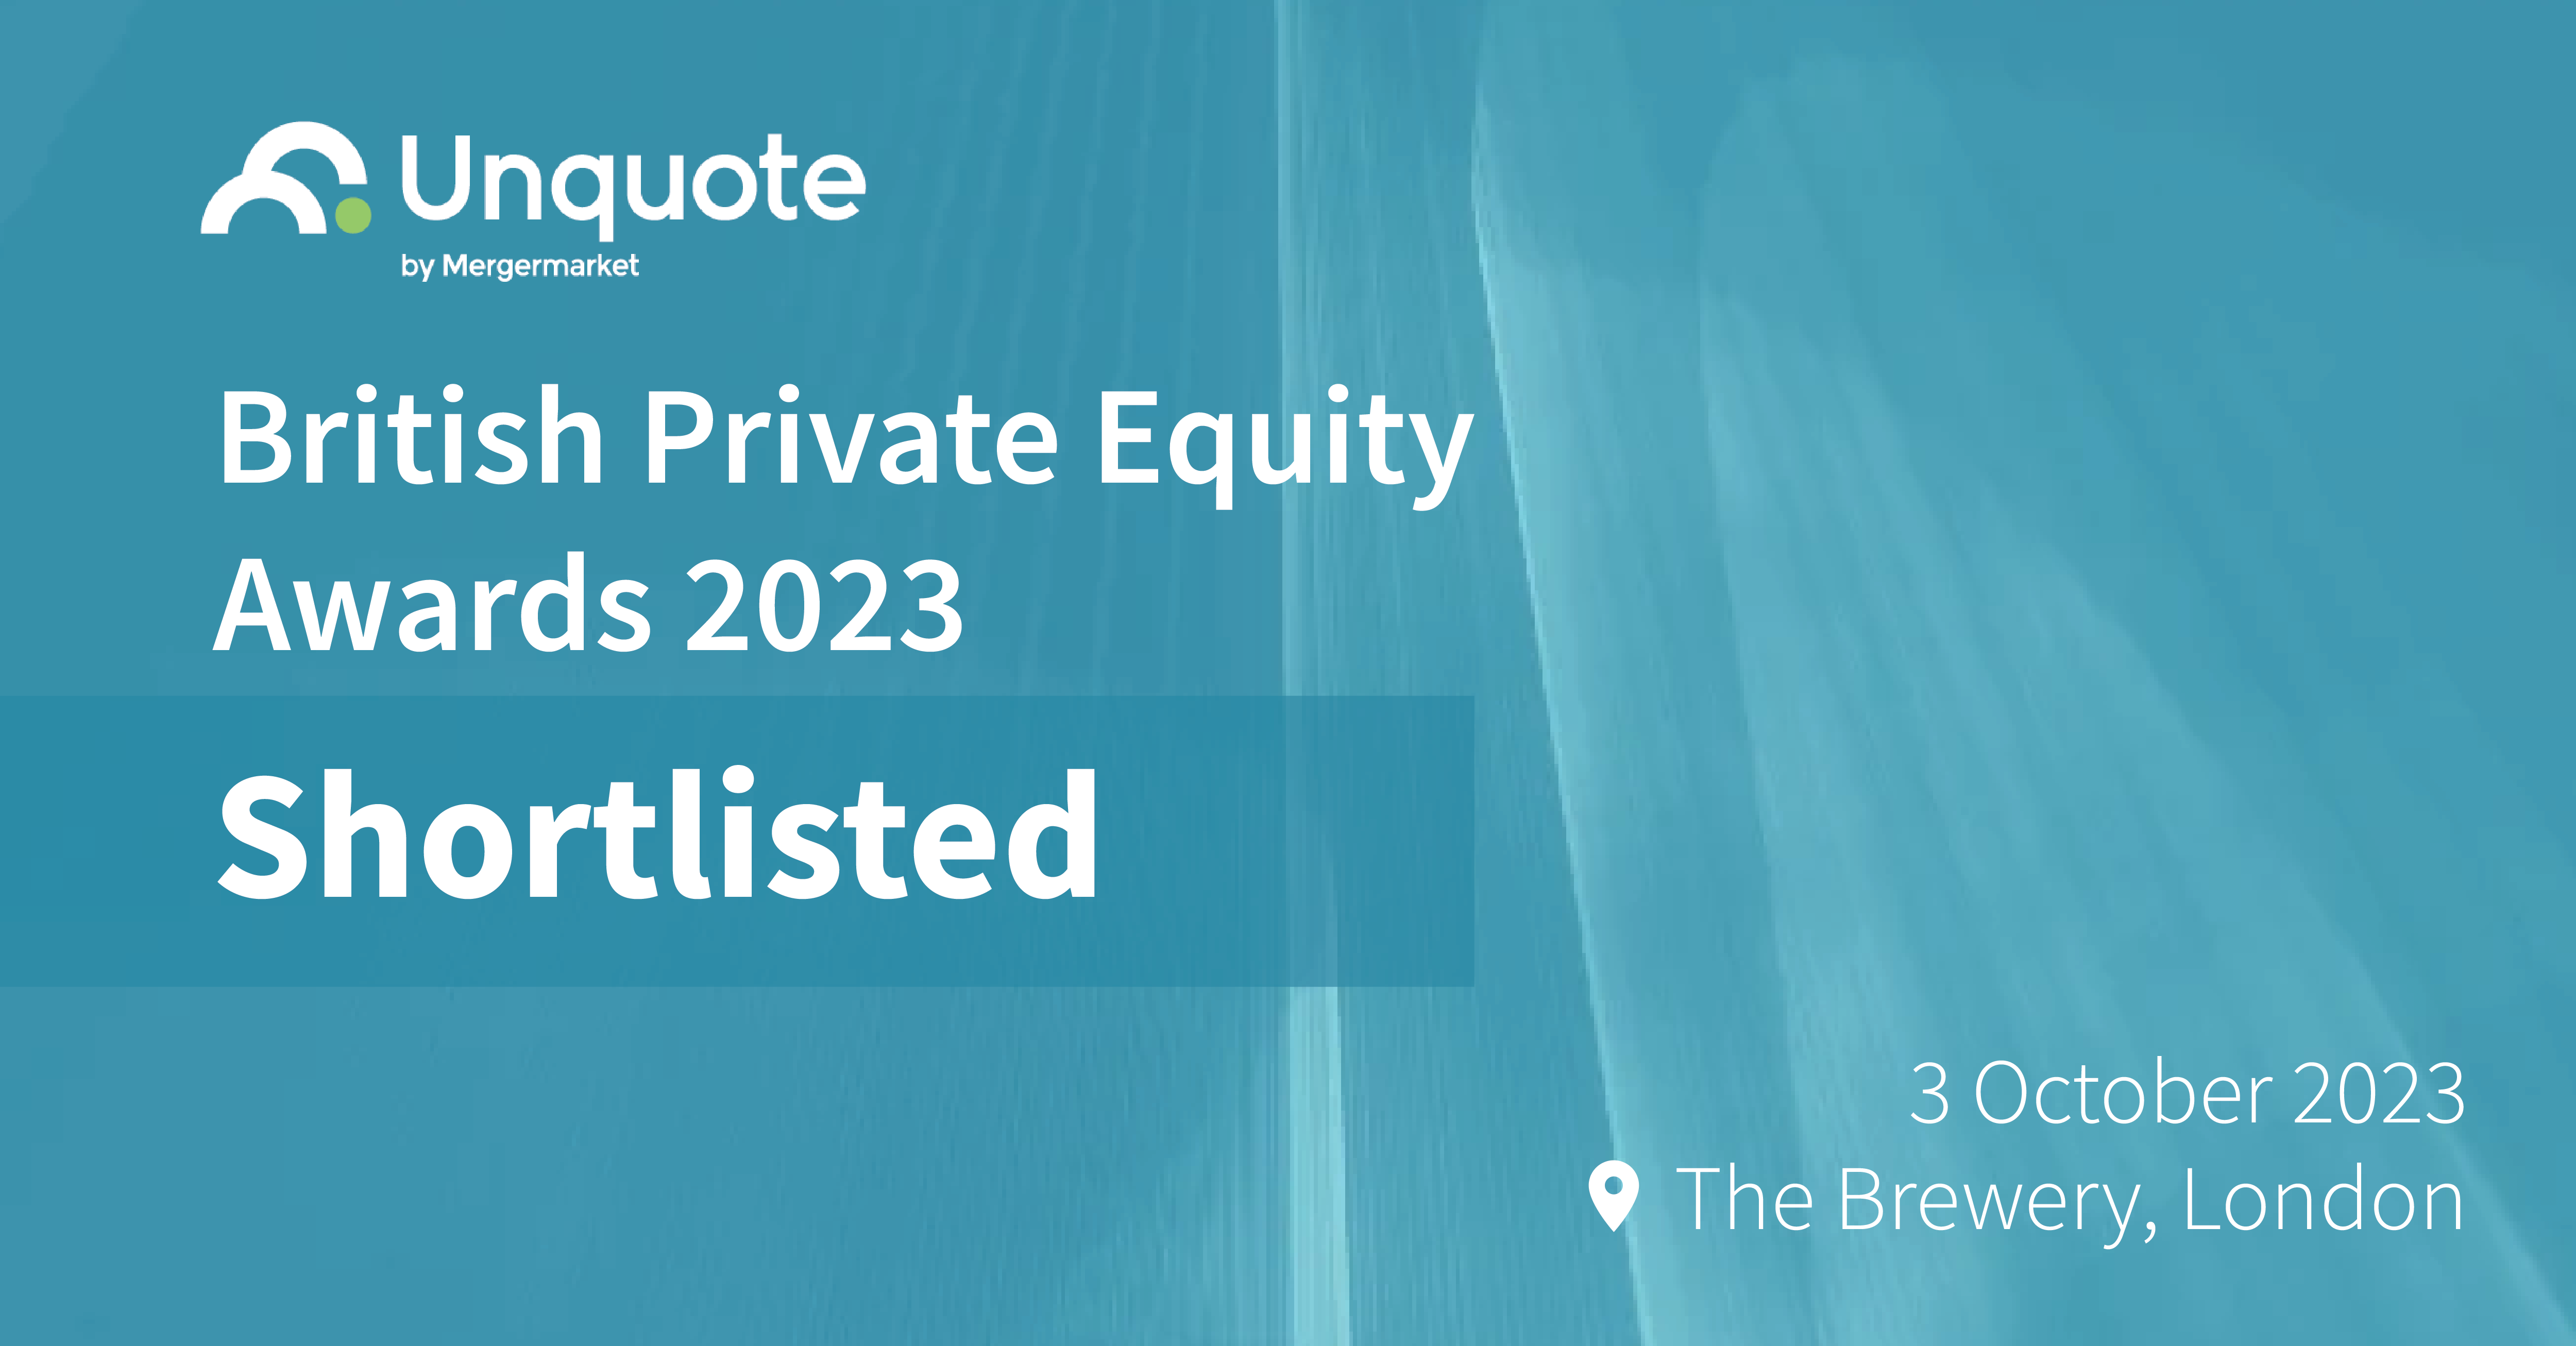 Luminii shortlisted as Commercial Due Diligence Provider of the Year at Unquote's British Private Equity Awards 2023